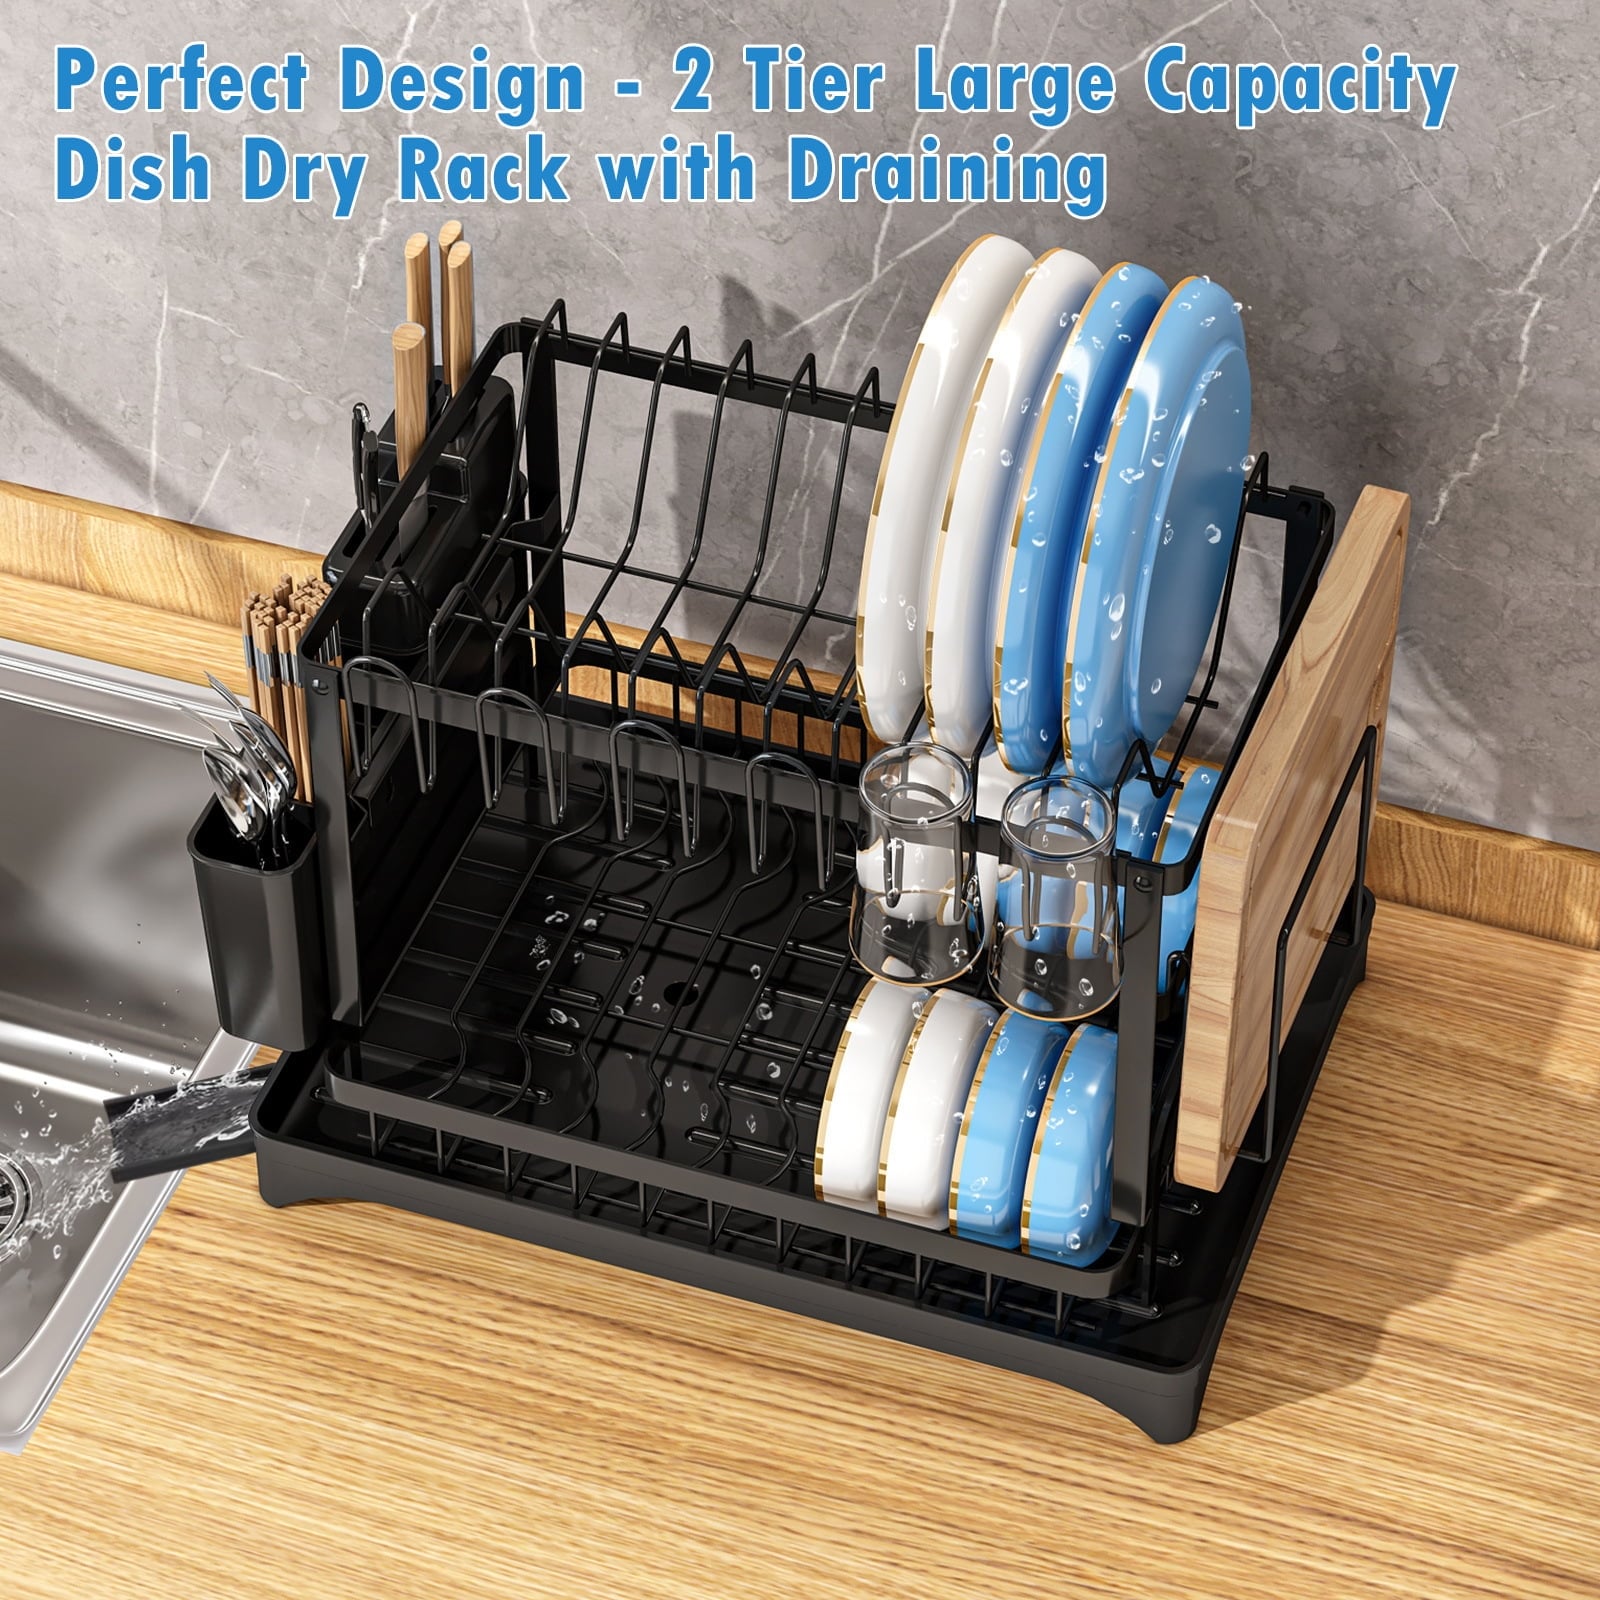 https://ak1.ostkcdn.com/images/products/is/images/direct/b0f8d6c1b561bfc08f55794fc07f21580fc6d704/2-Tier-Dish-Drying-Rack-with-Drainboard.jpg